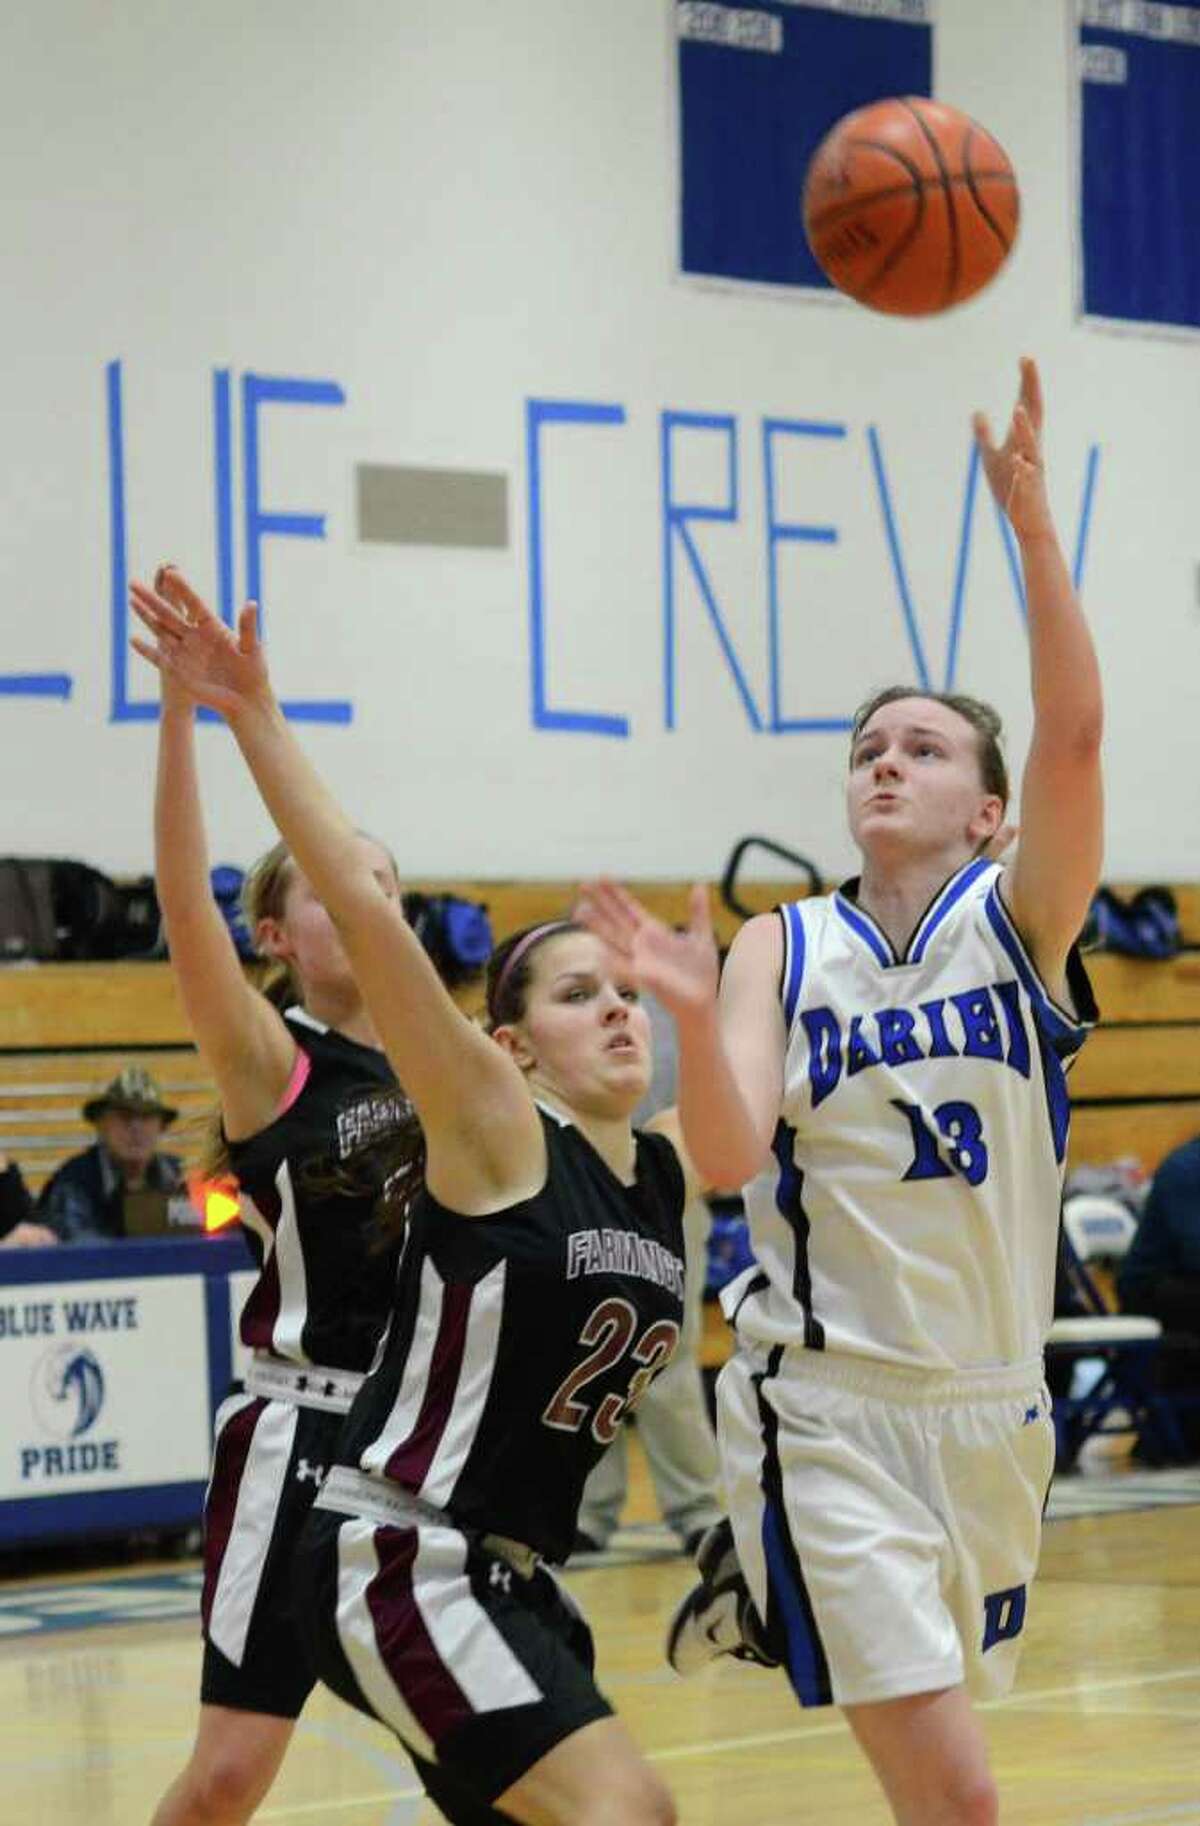 Darien's Kate Bushell (13) goes up for a shot against Farmington's Ugne Vaiciulyte (23) during the girls basketball game at Darien High School on Tuesday, Feb. 28, 2012.